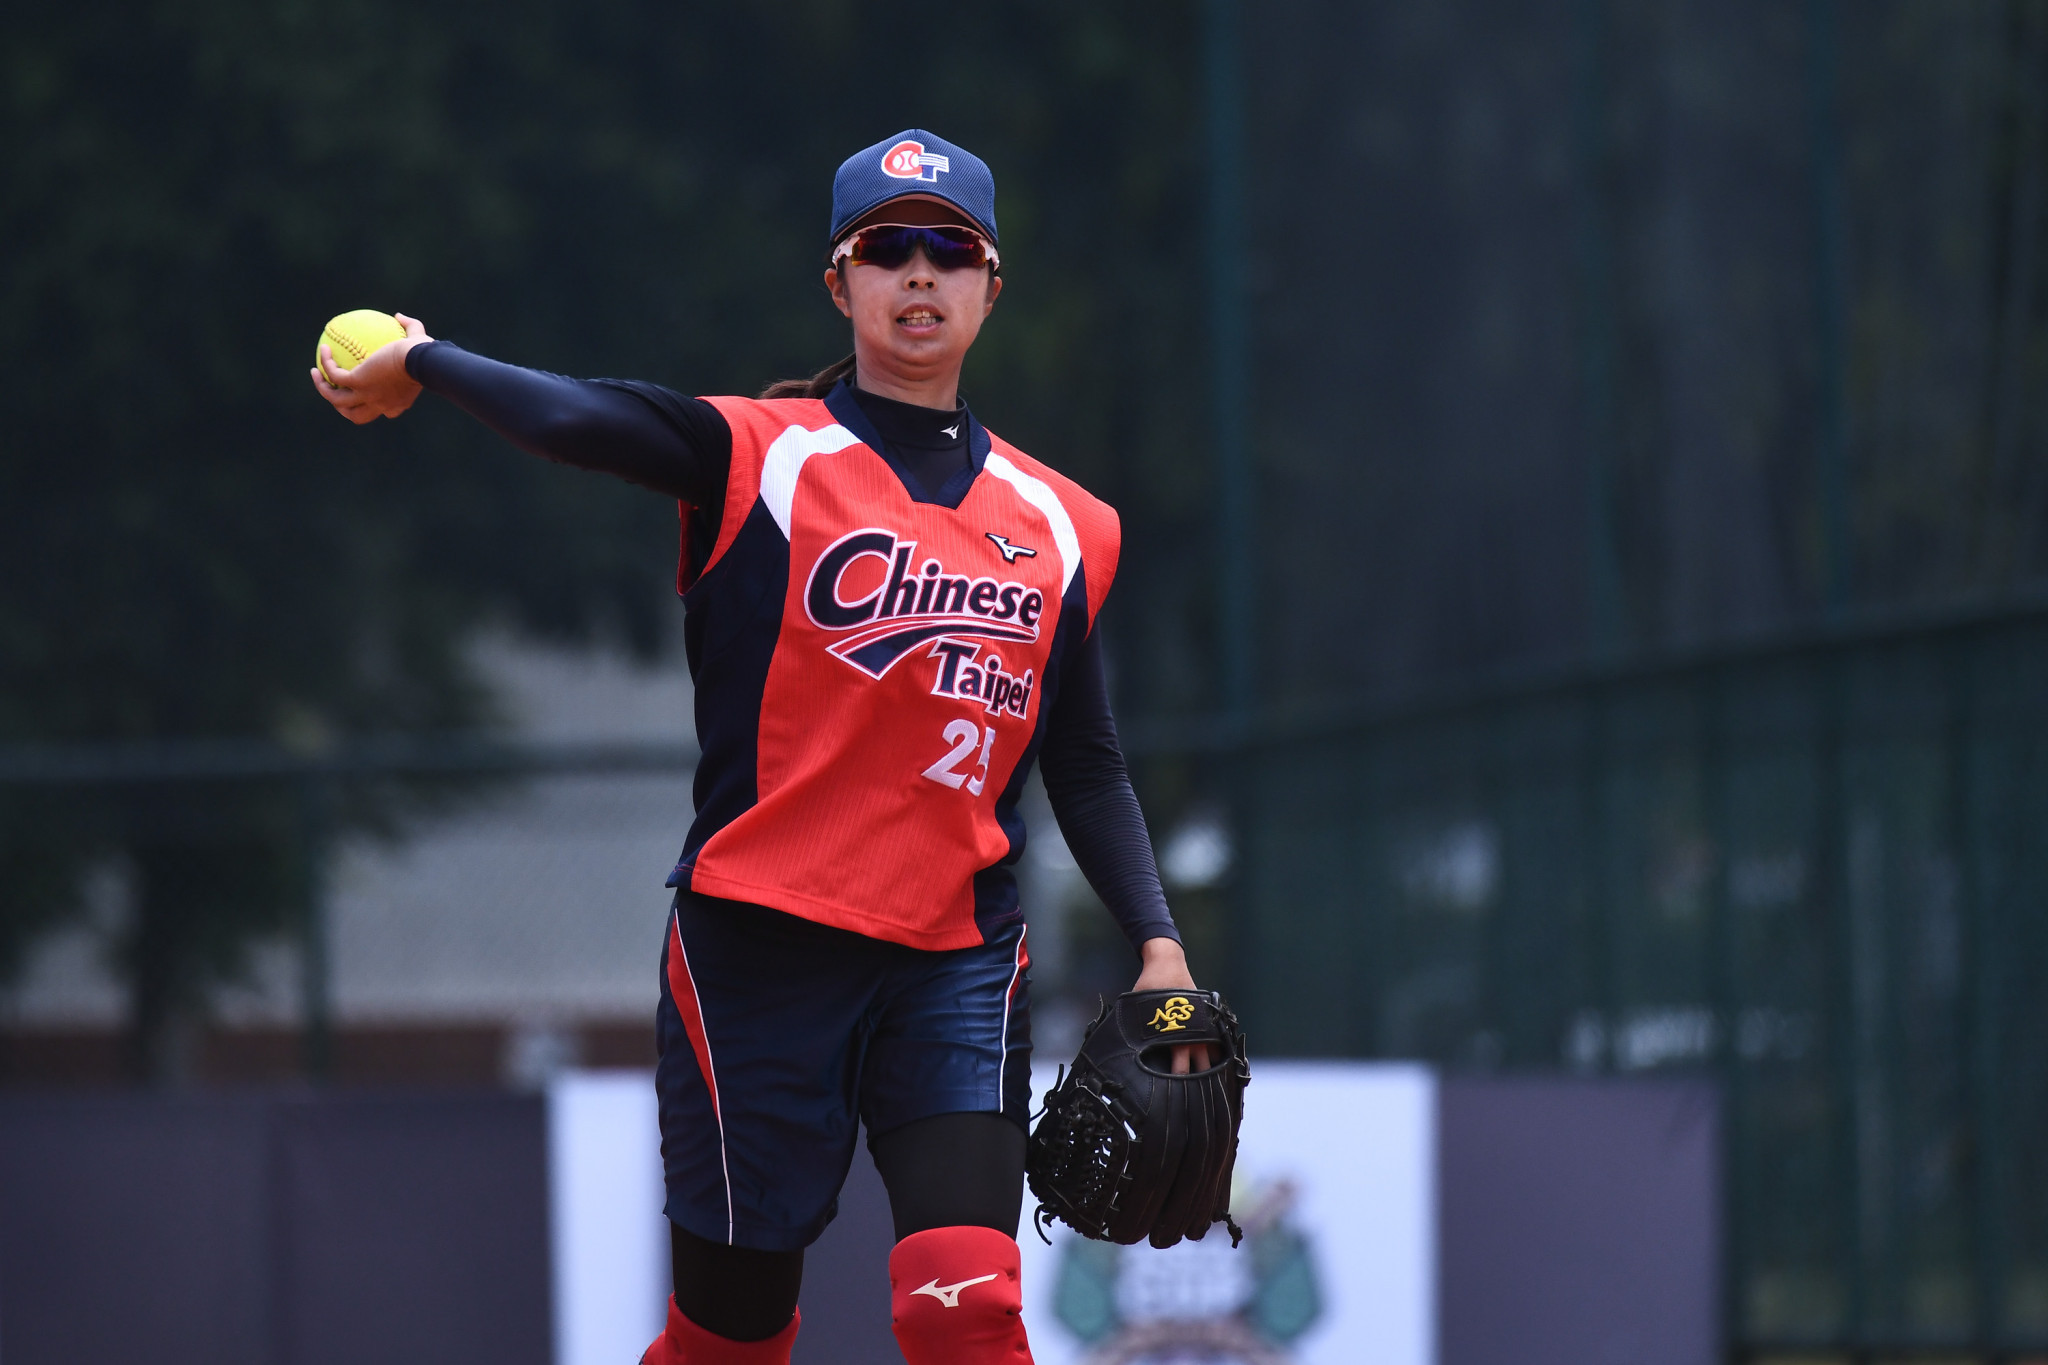 Chinese Taipei's women's softball team to face men's side to prepare for Asian Games